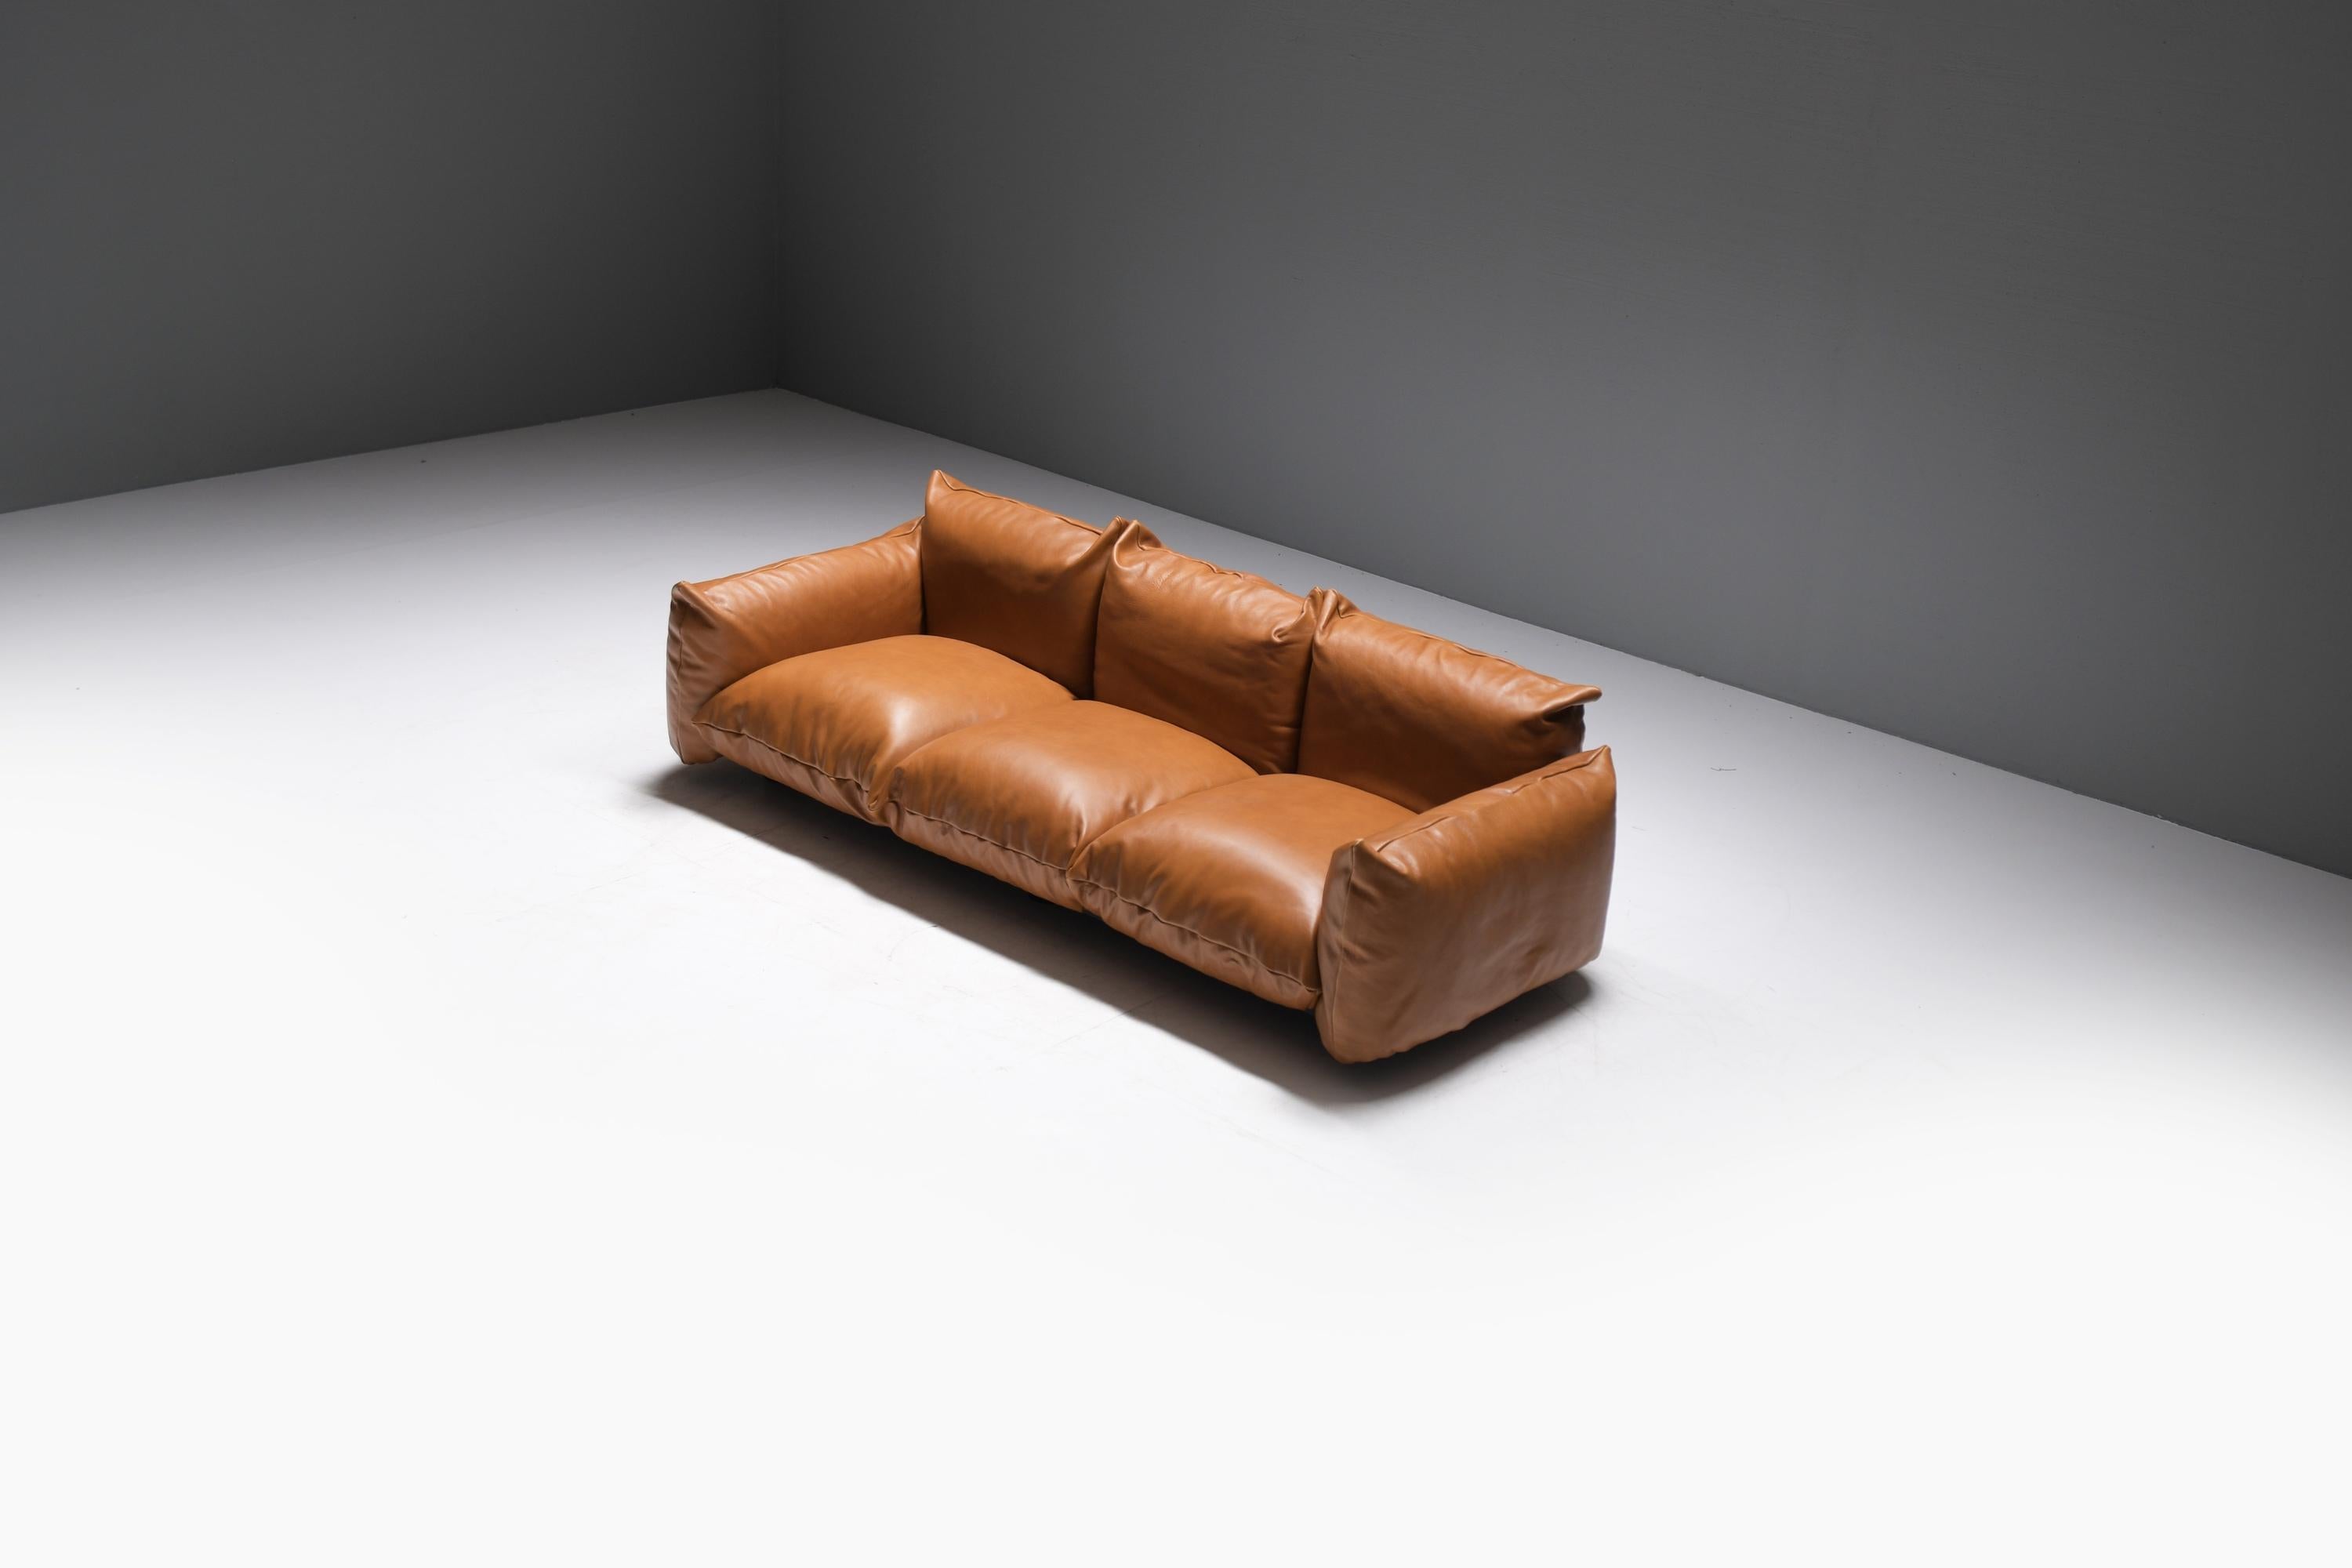 Vintage Marenco 255 sofa in new cognac leather by Mario Marenco for ARFLEX Italy In Good Condition For Sale In Buggenhout, Oost-Vlaanderen